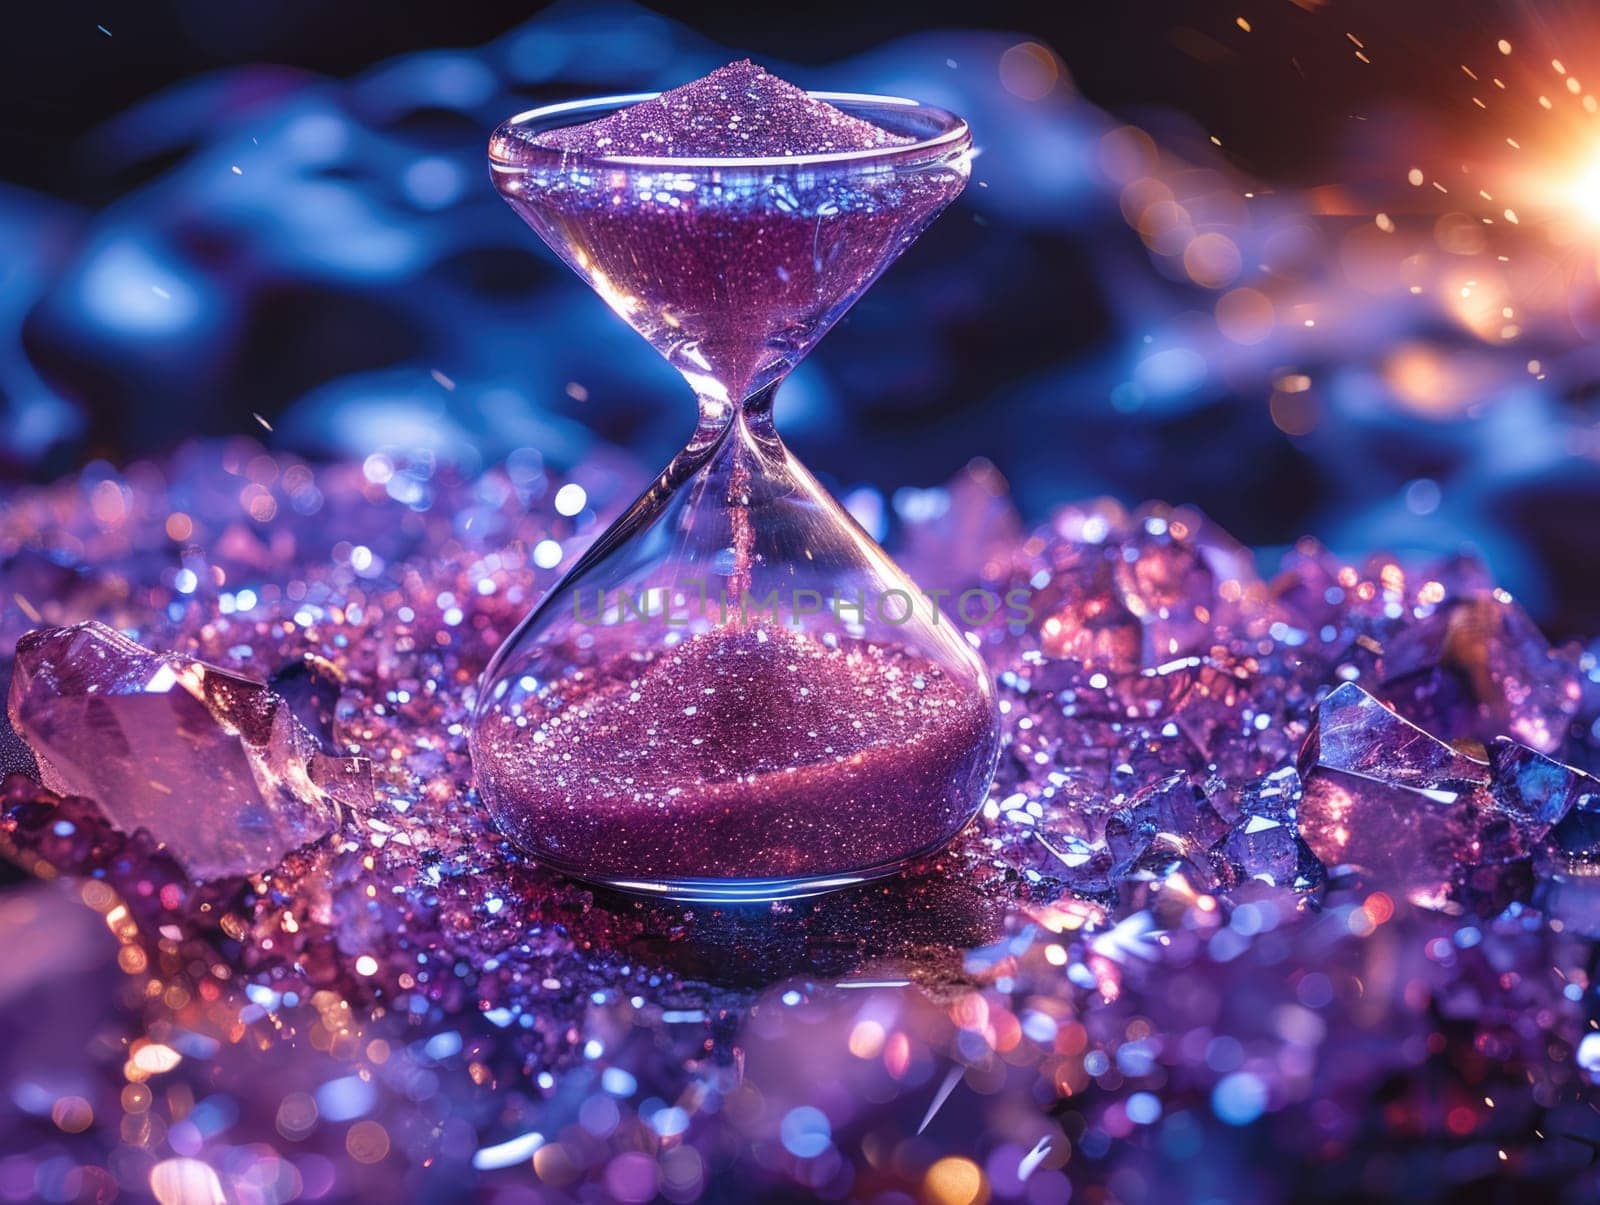 Elegant Hourglass With Purple Sand by but_photo